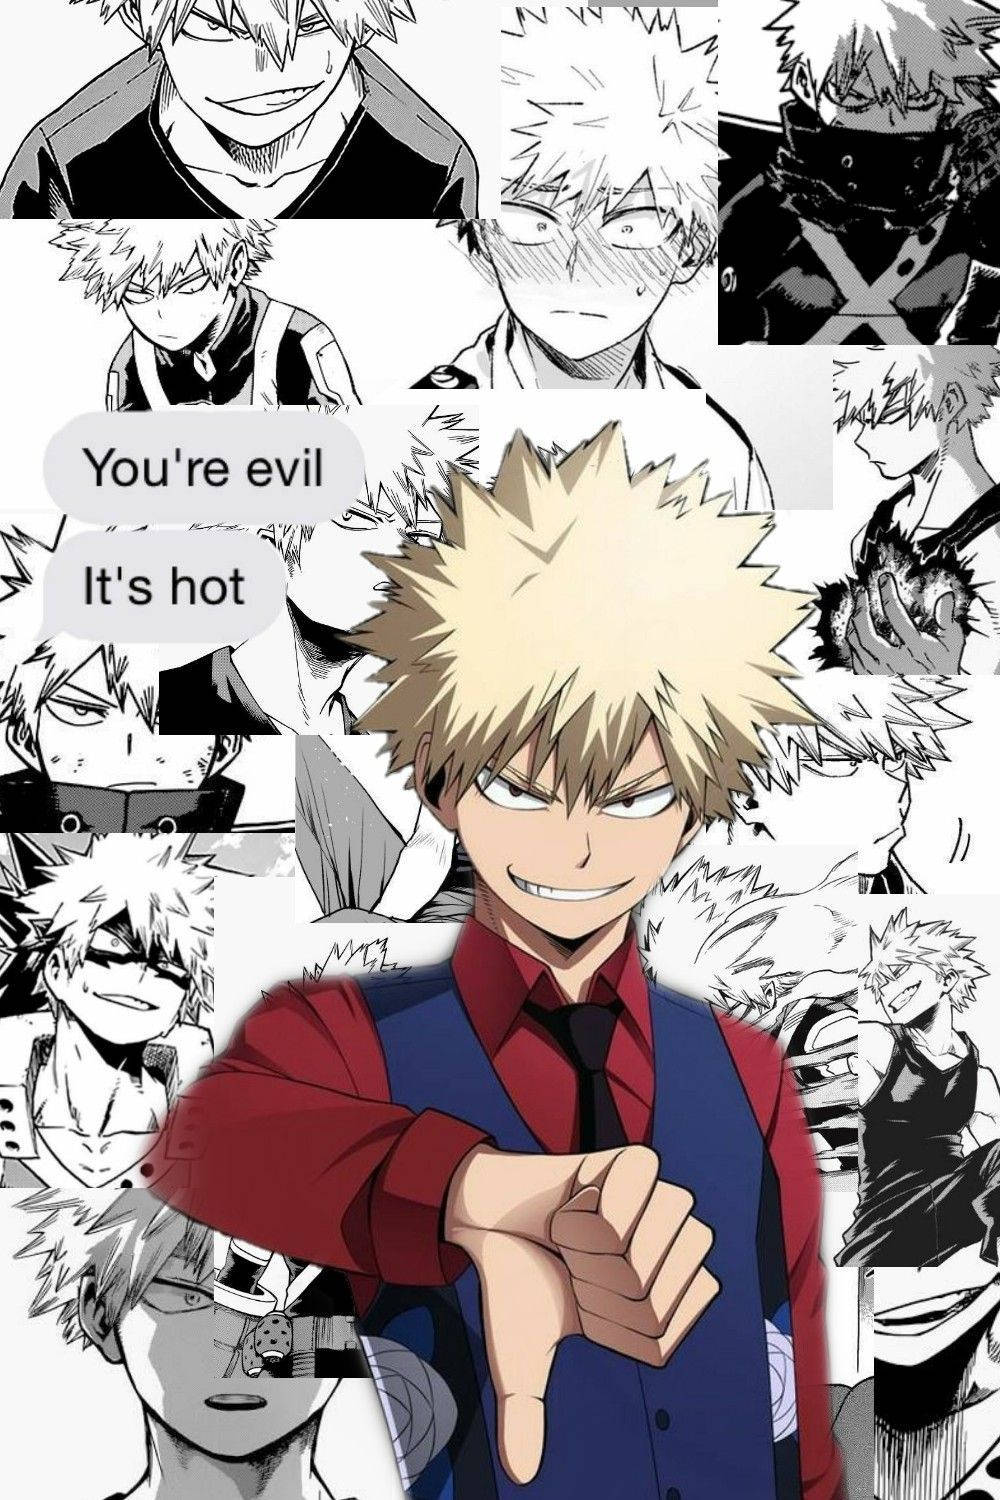 Cute Bakugou Melting Hearts With His Adorably Playful Expression Background